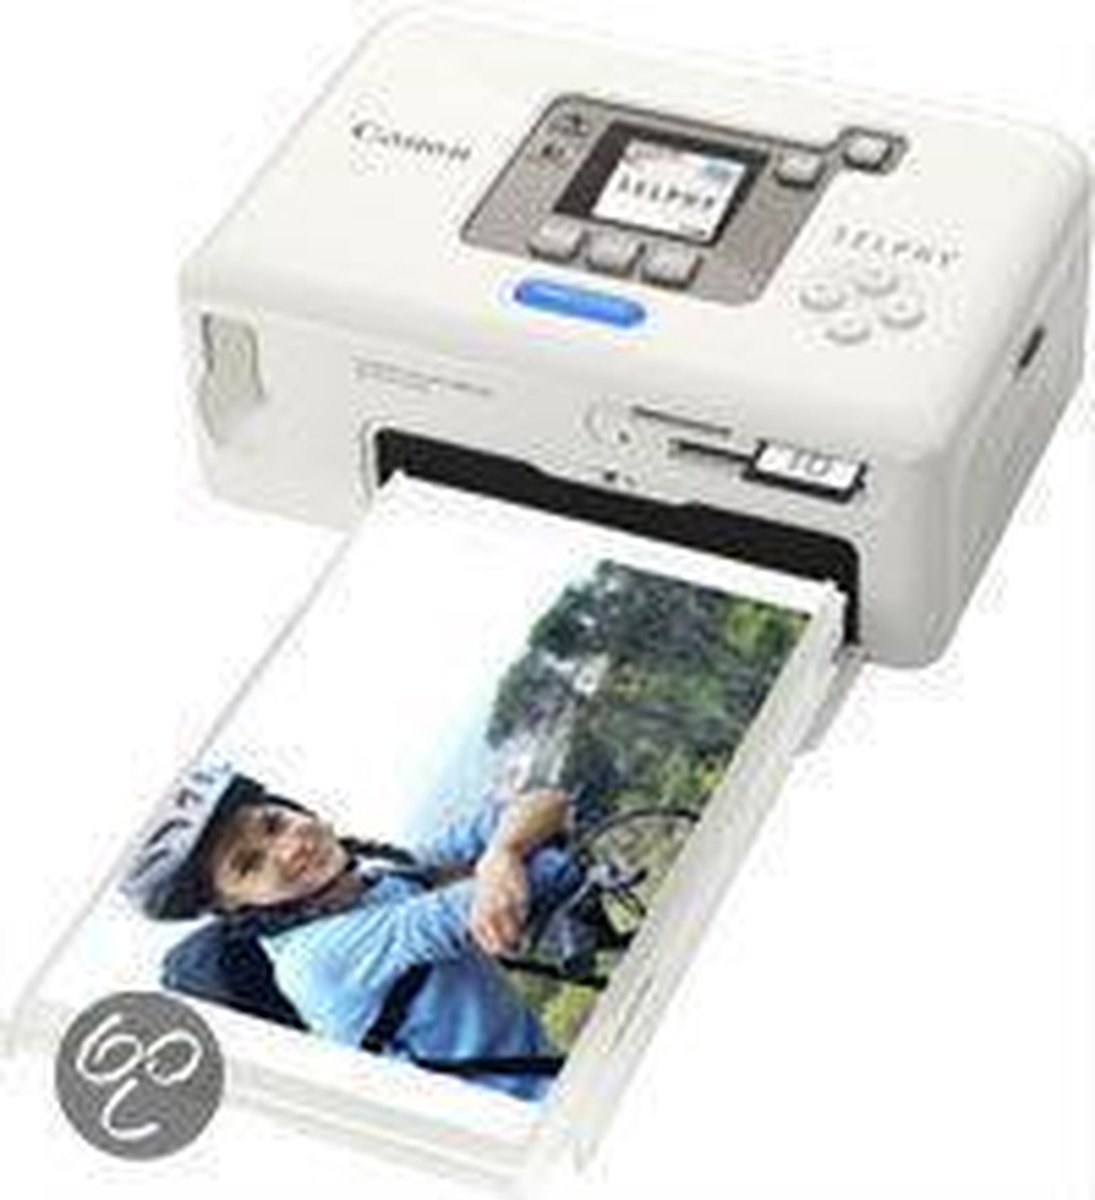 Canon Selphy Cp720 Fotoprinter 6516